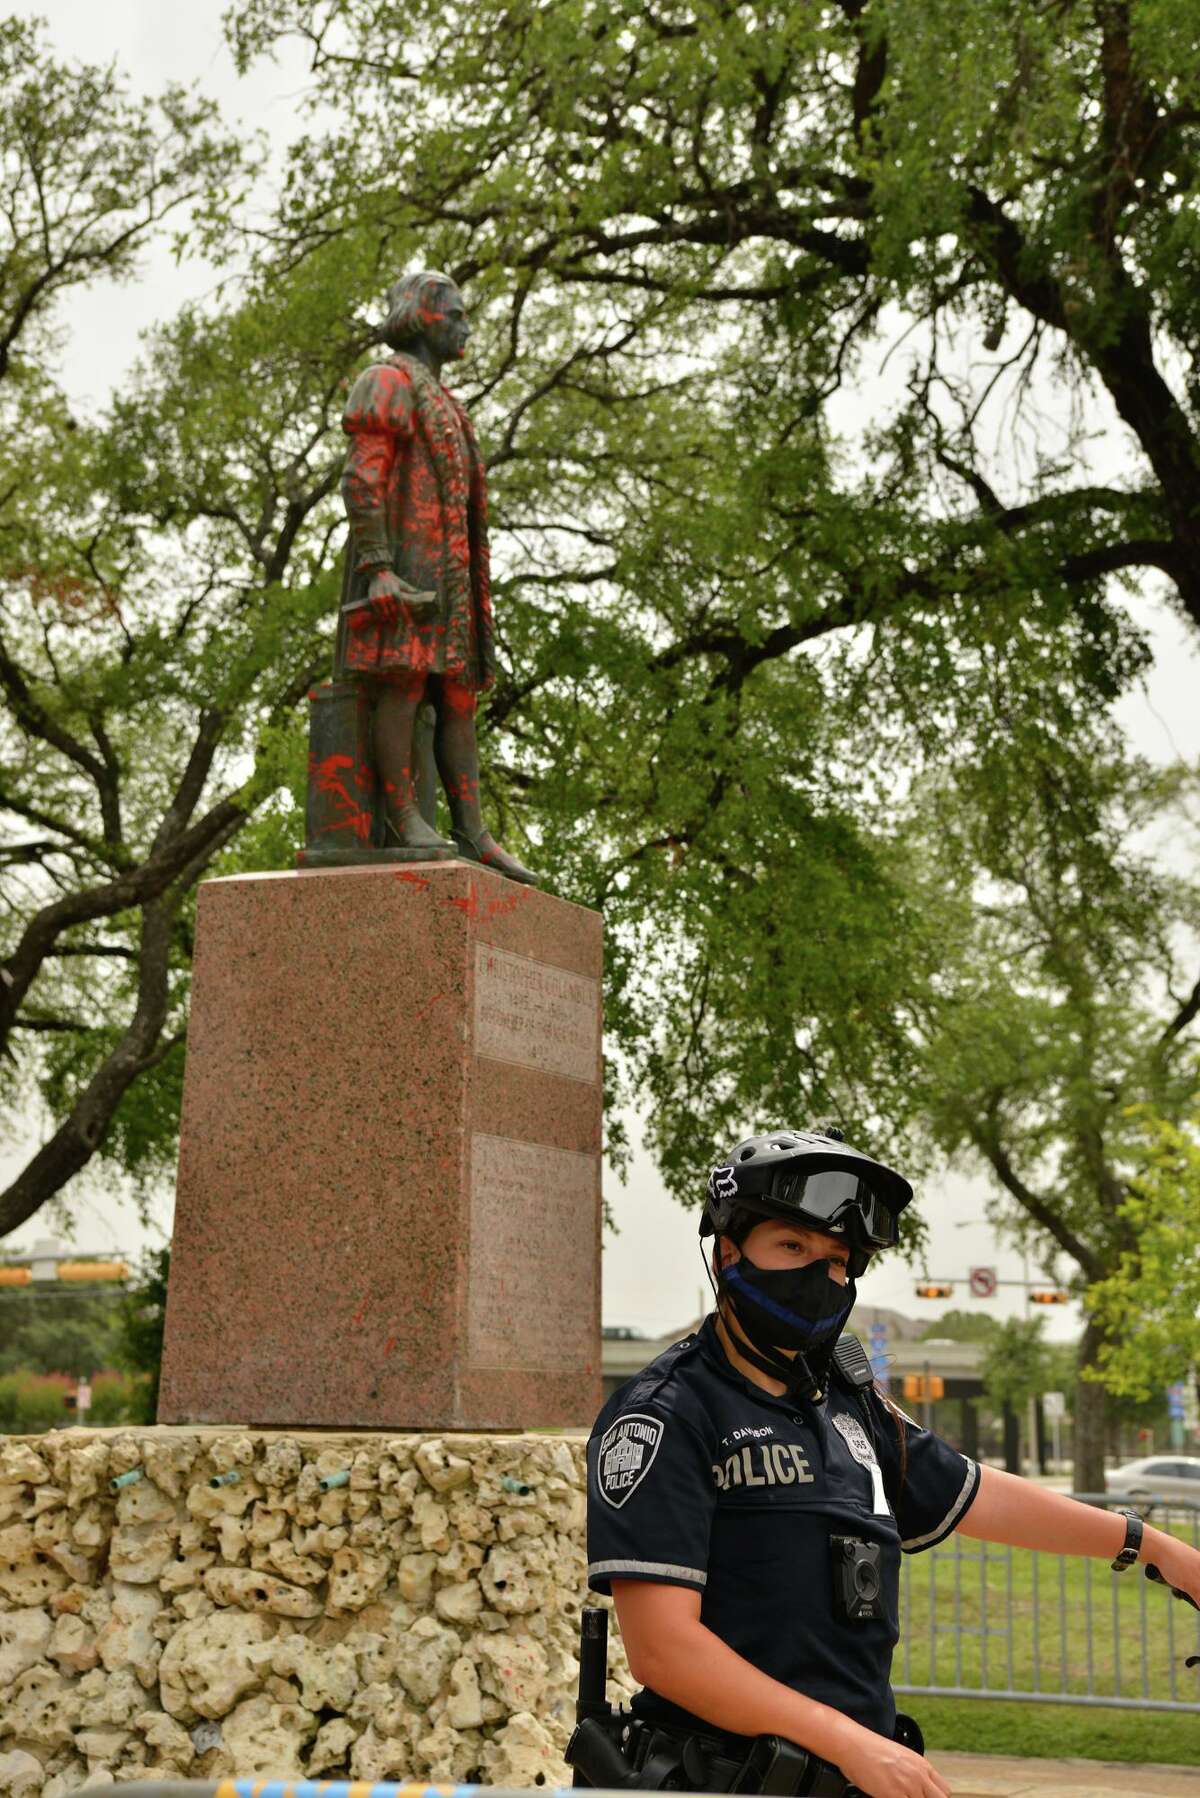 Police stand guard around the Christopher Columbus statue after a demonstration in the park Saturday afternoon.